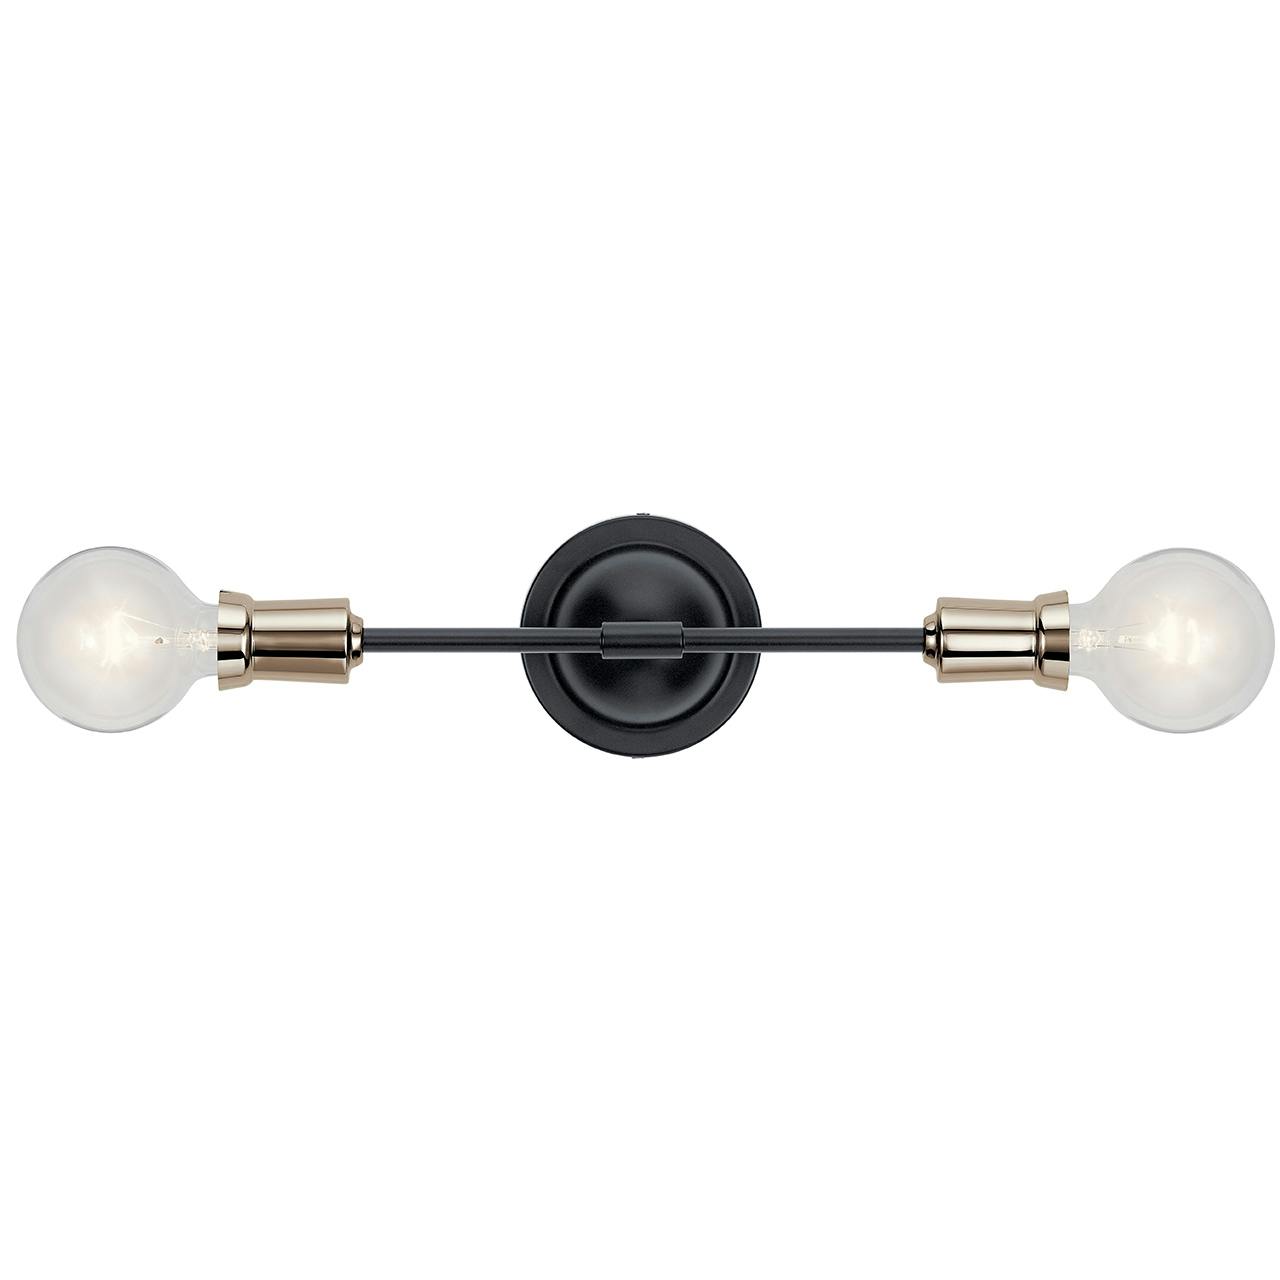 Front view of the Armstrong Wall Sconce Black Finish on a white background